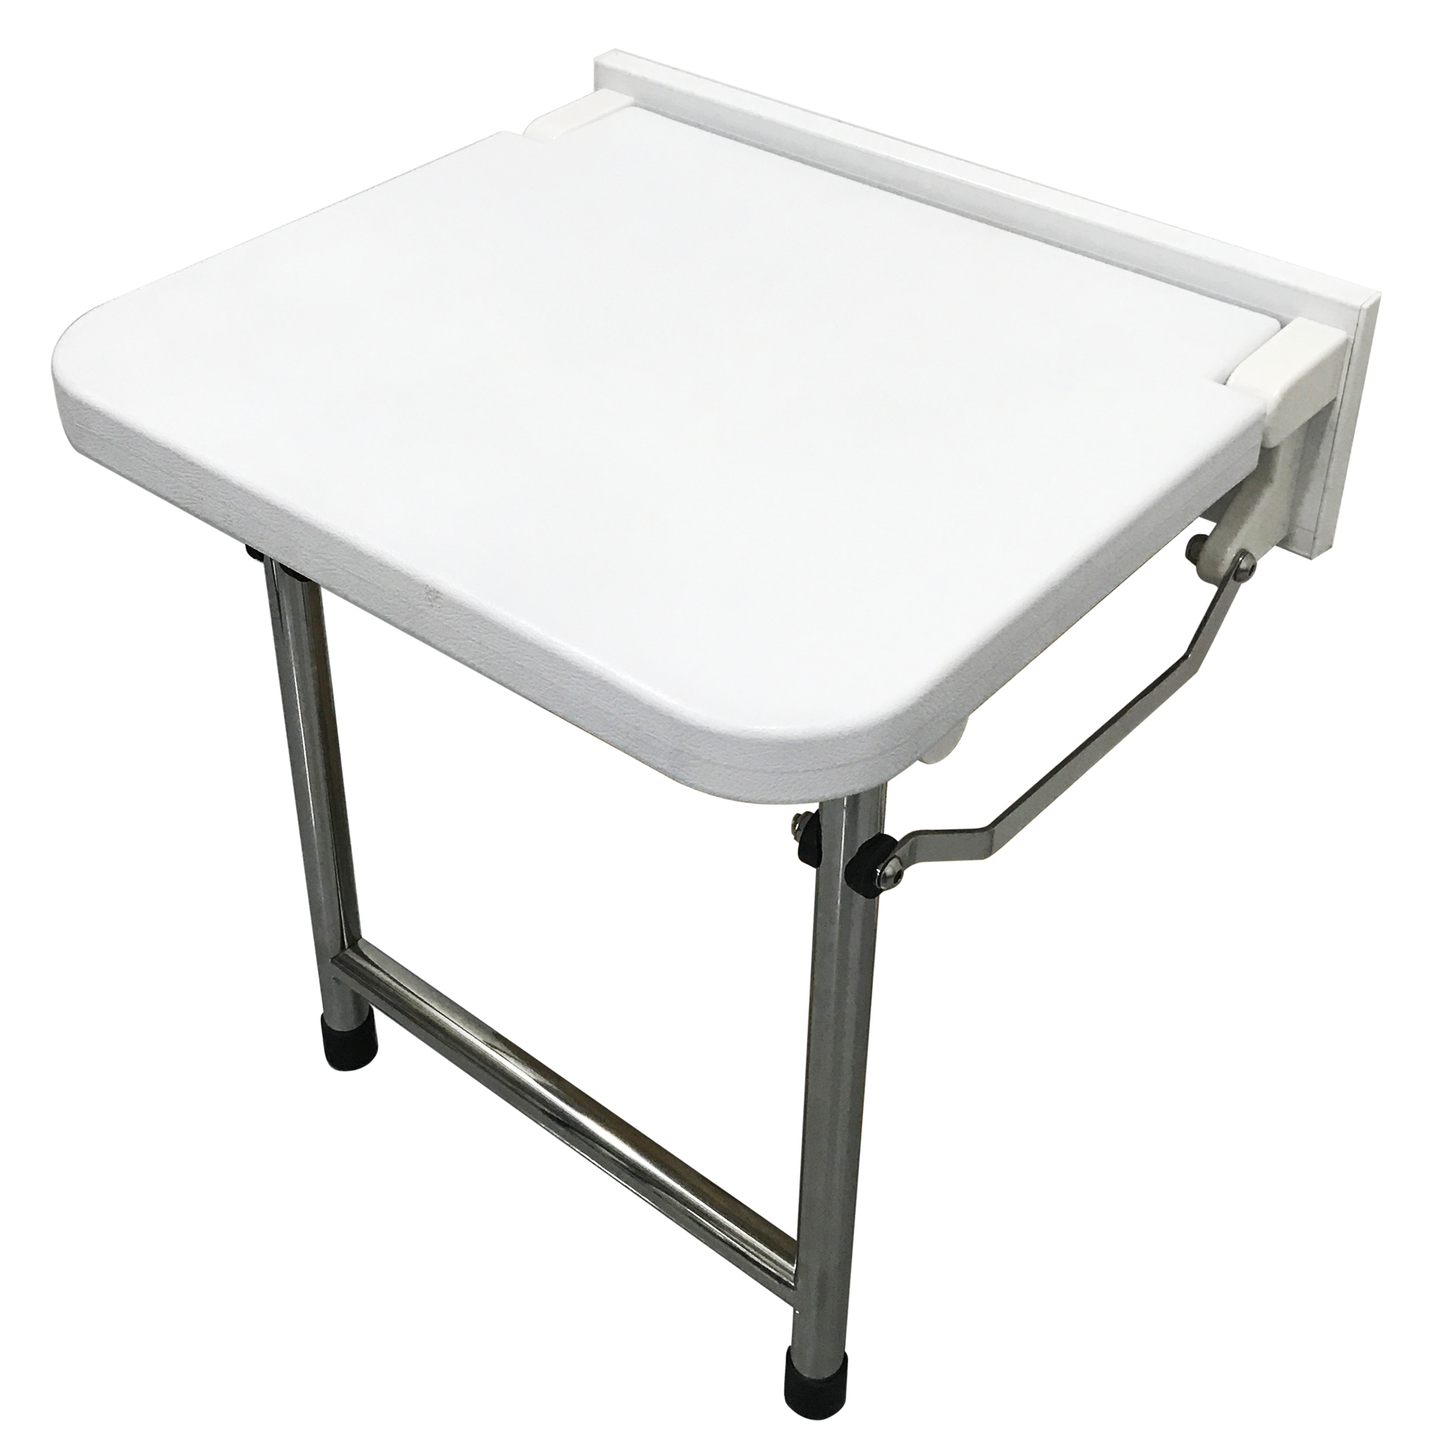 HappyBath Deluxe Wall Mounted Shower Seat With Legs Glacier White / No